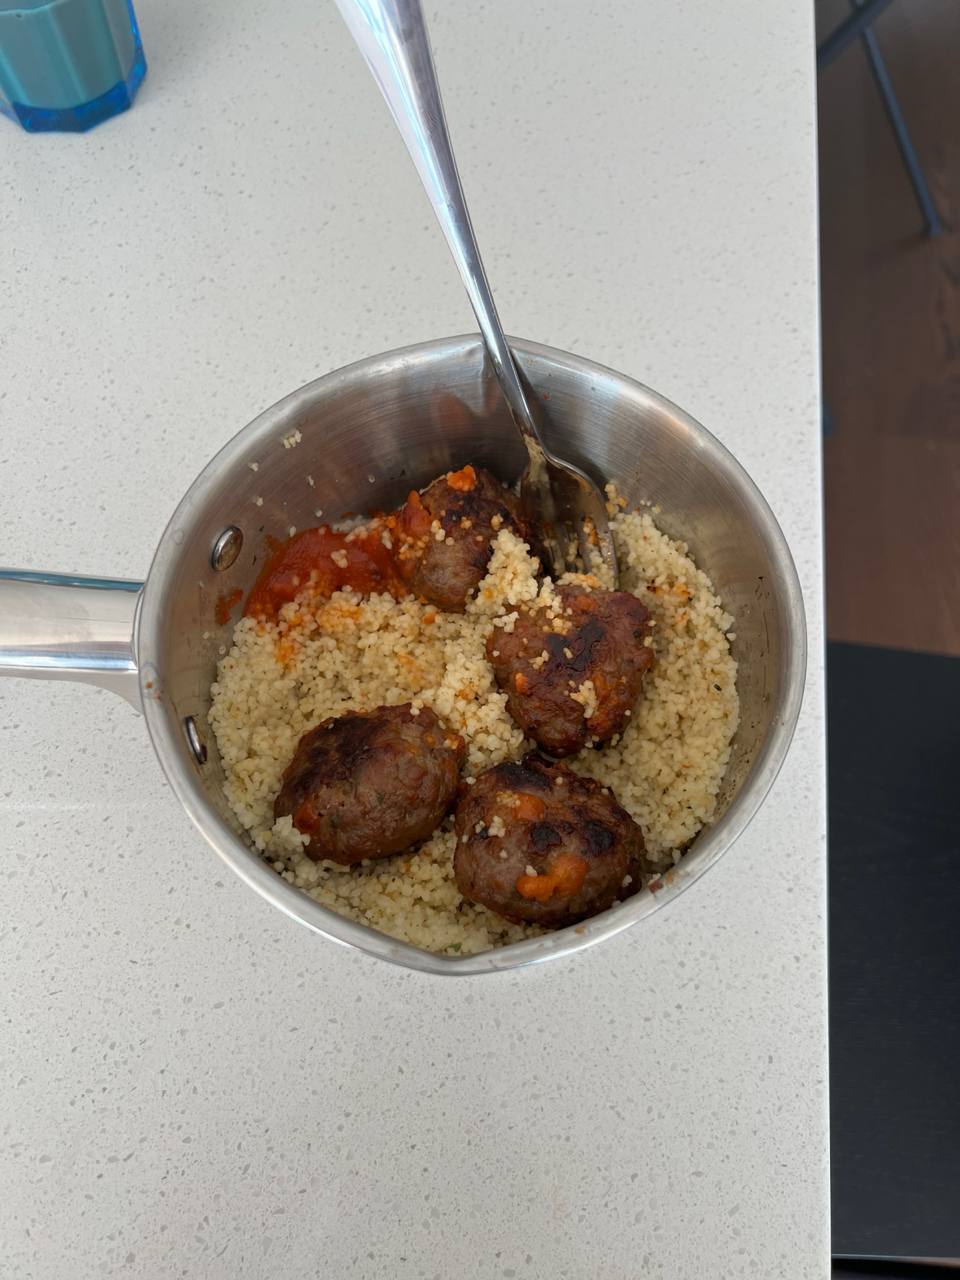 Couscous And Meatballs With Red Sauce